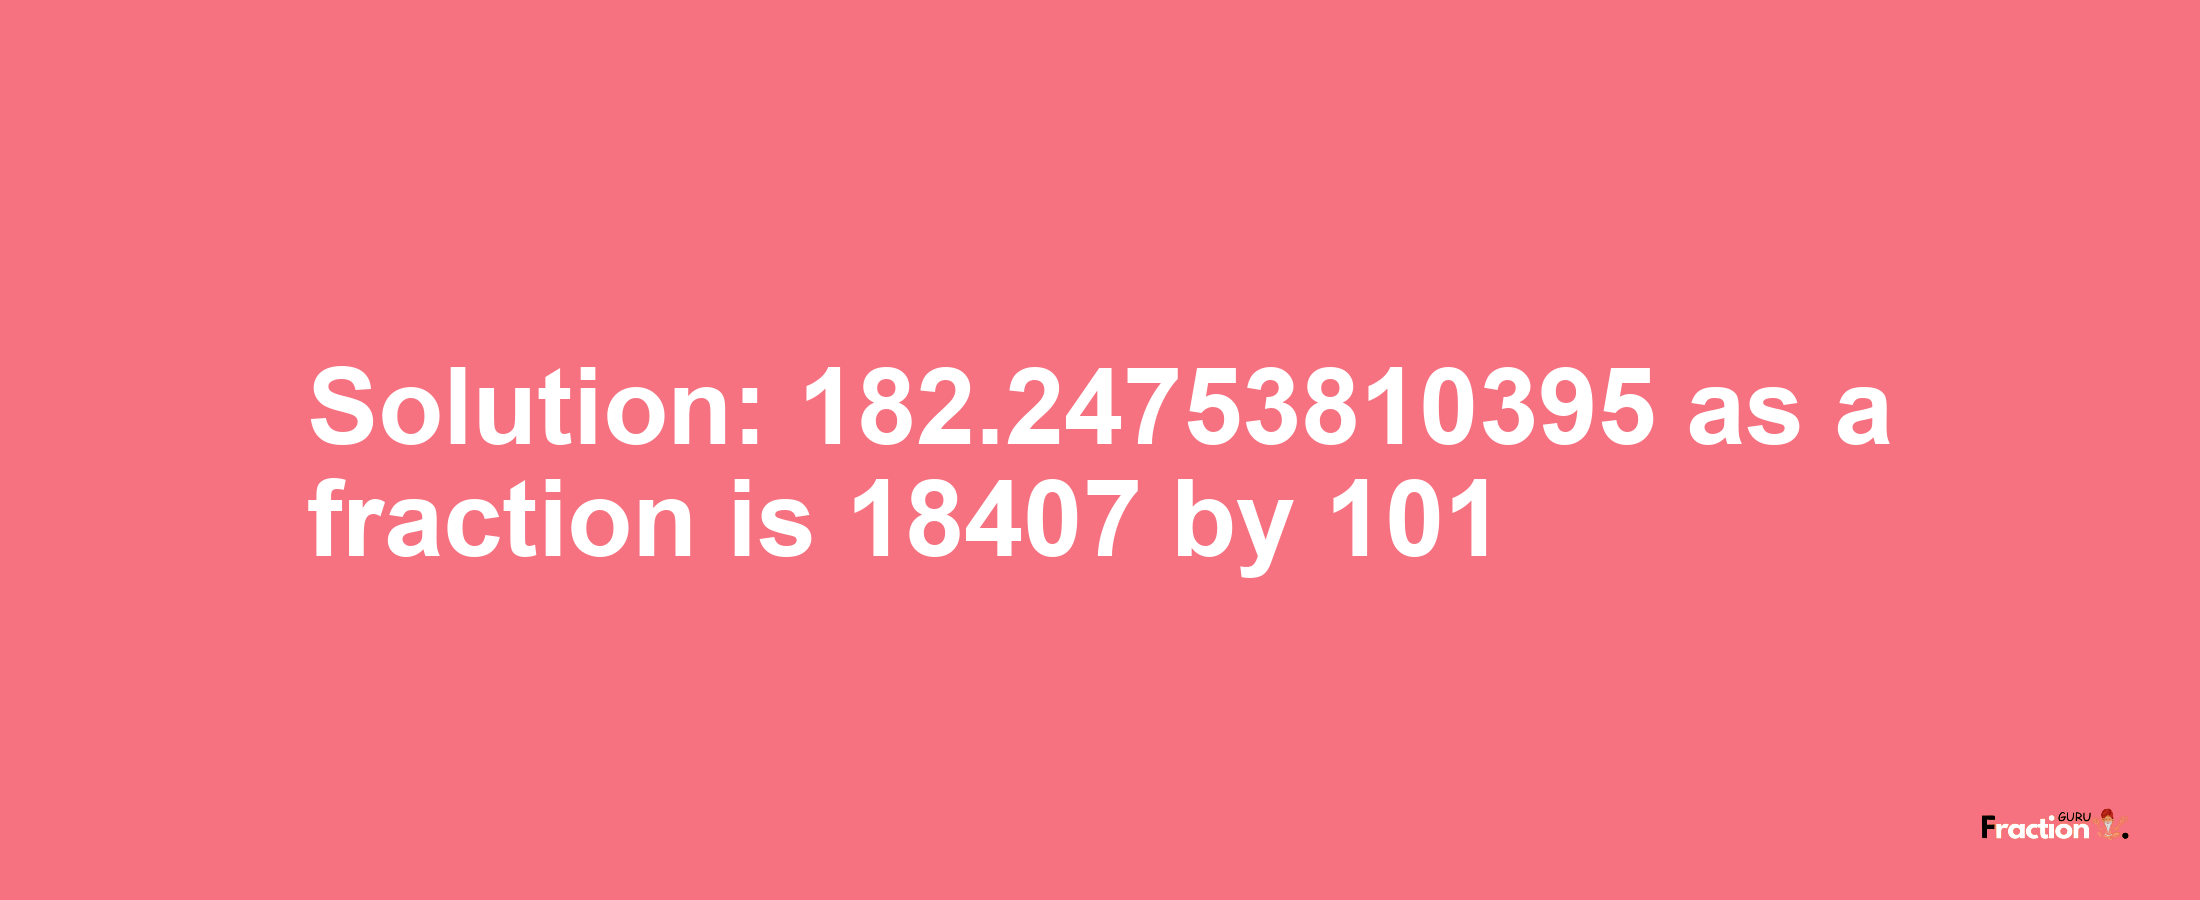 Solution:182.24753810395 as a fraction is 18407/101